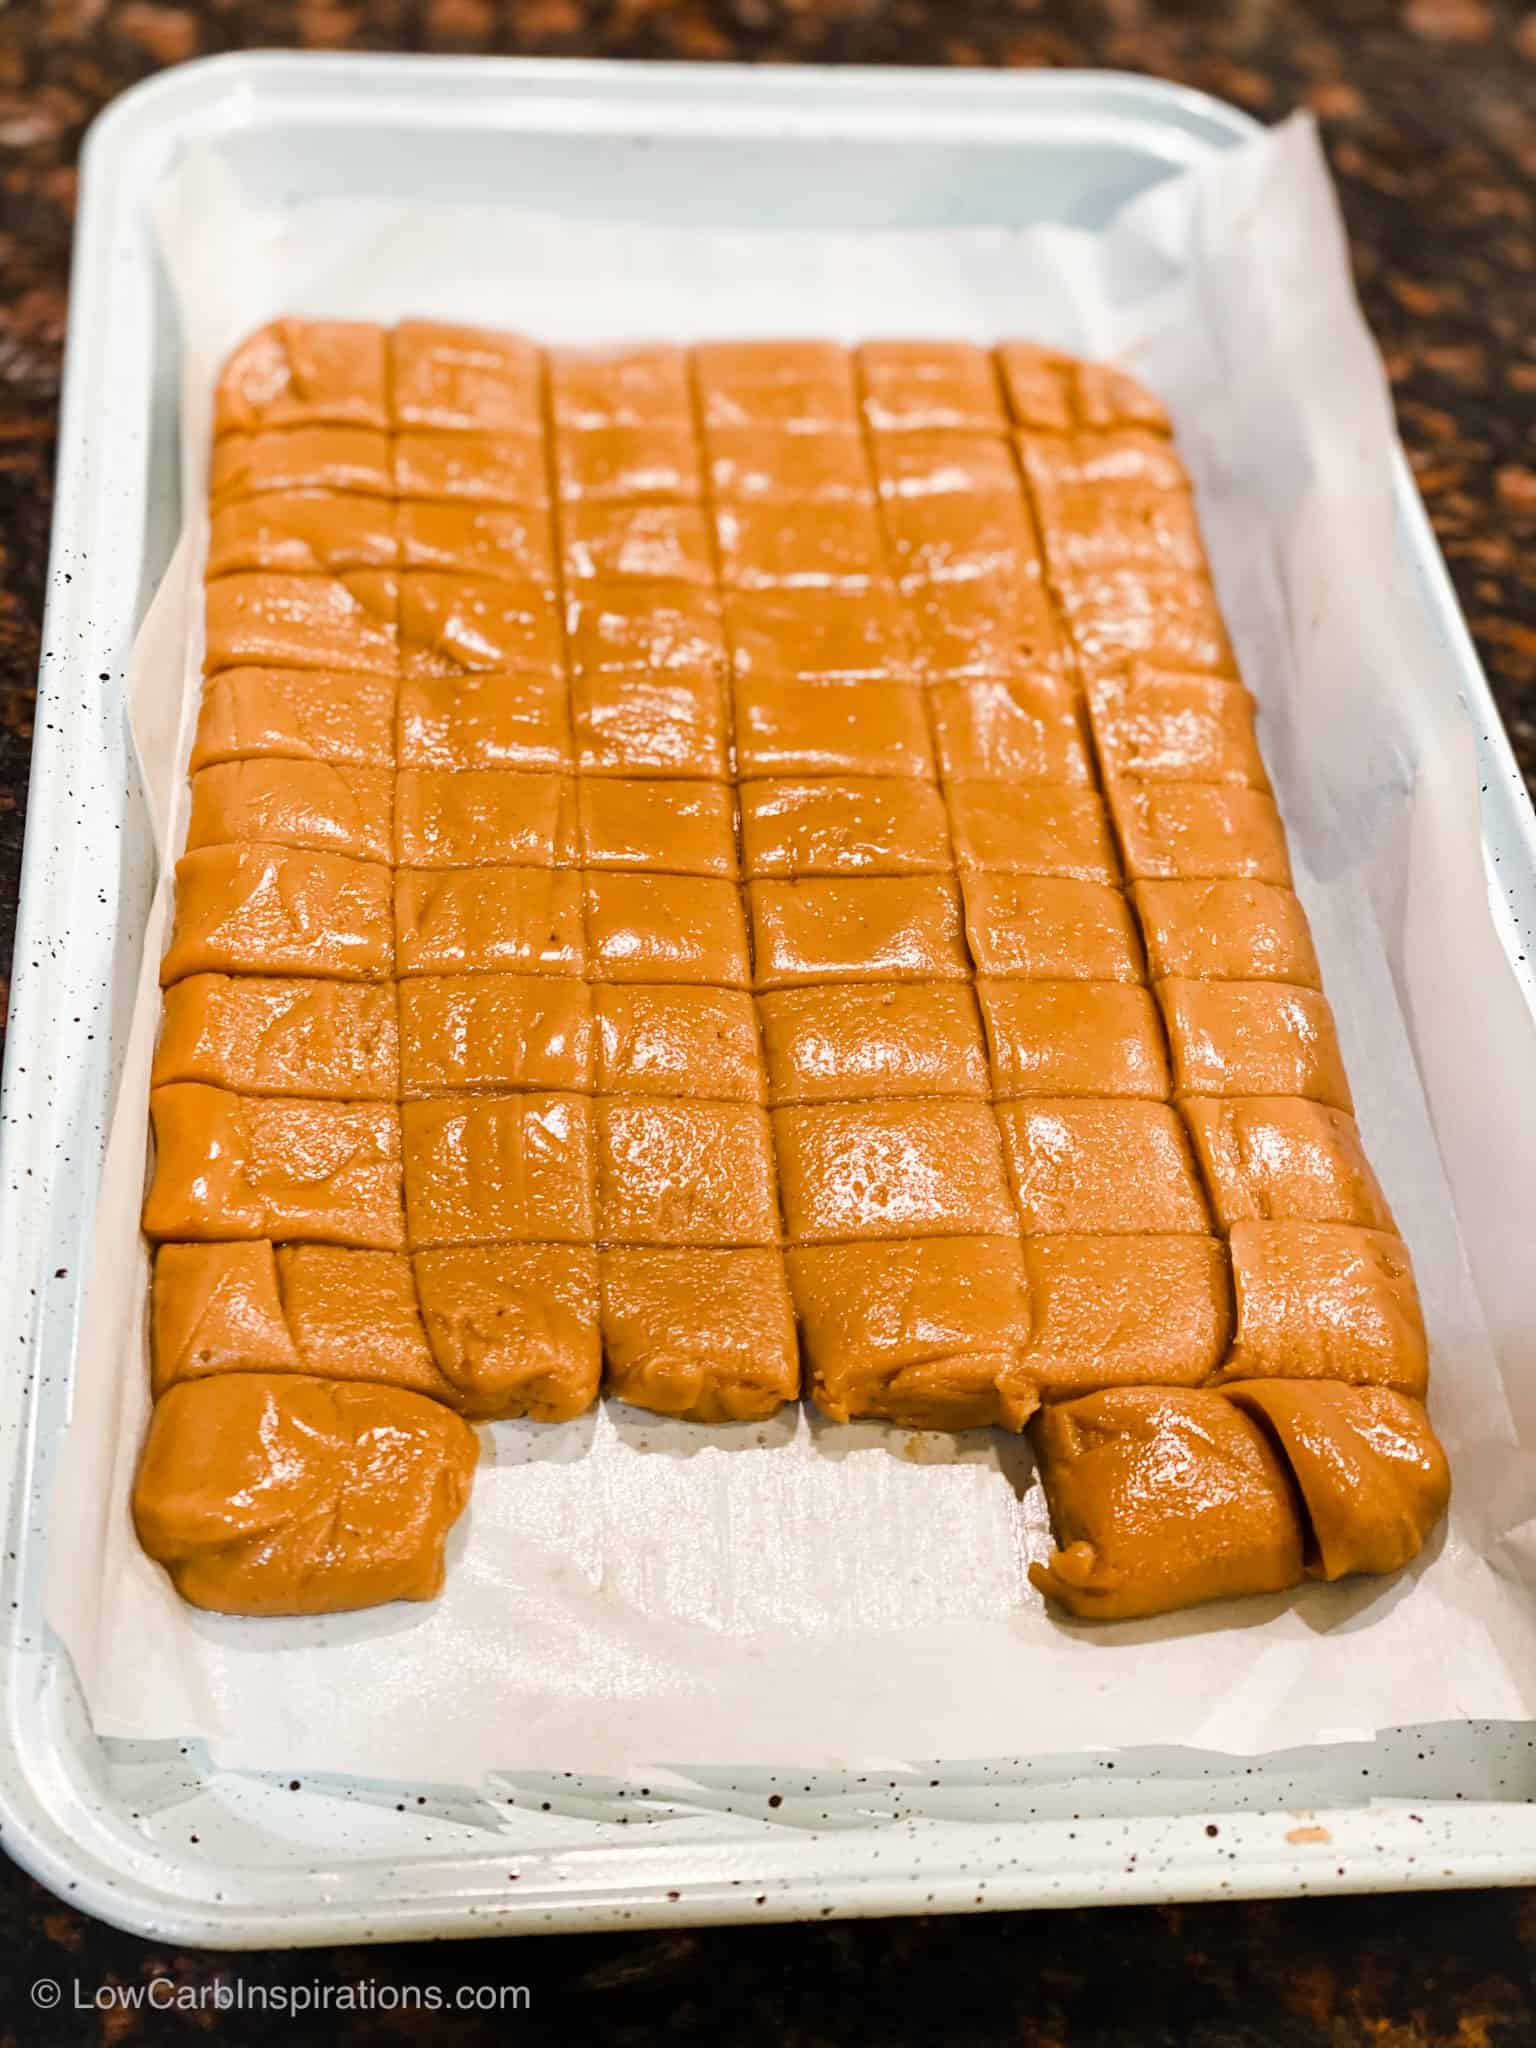 Keto Peanut Butter Fudge Recipe (only 2 ingredients needed!)